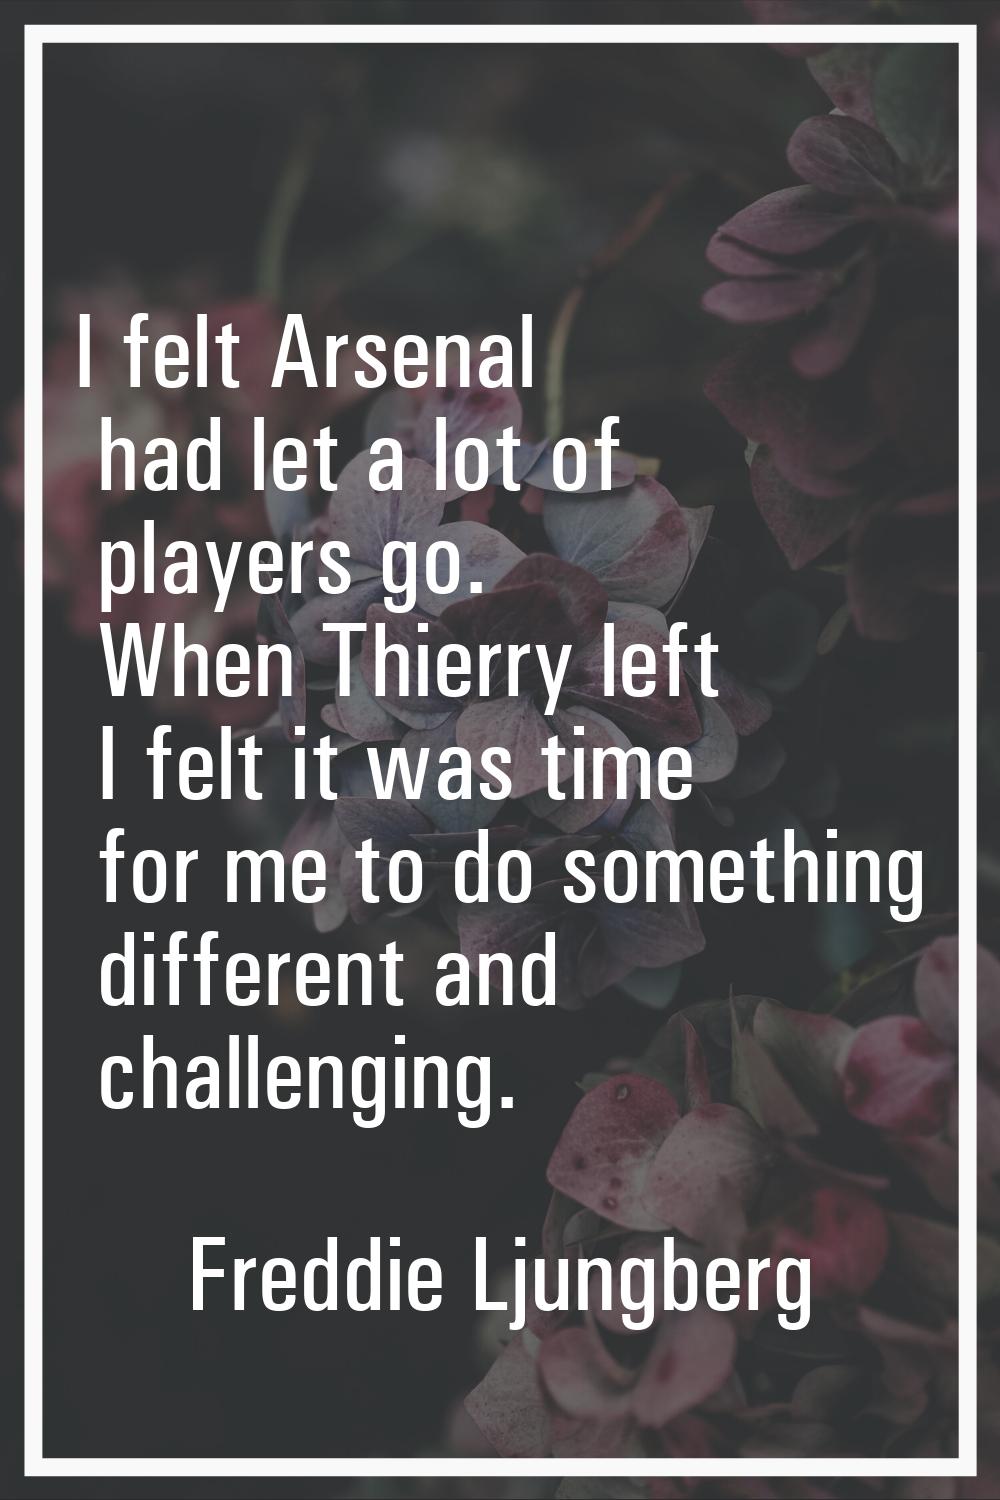 I felt Arsenal had let a lot of players go. When Thierry left I felt it was time for me to do somet